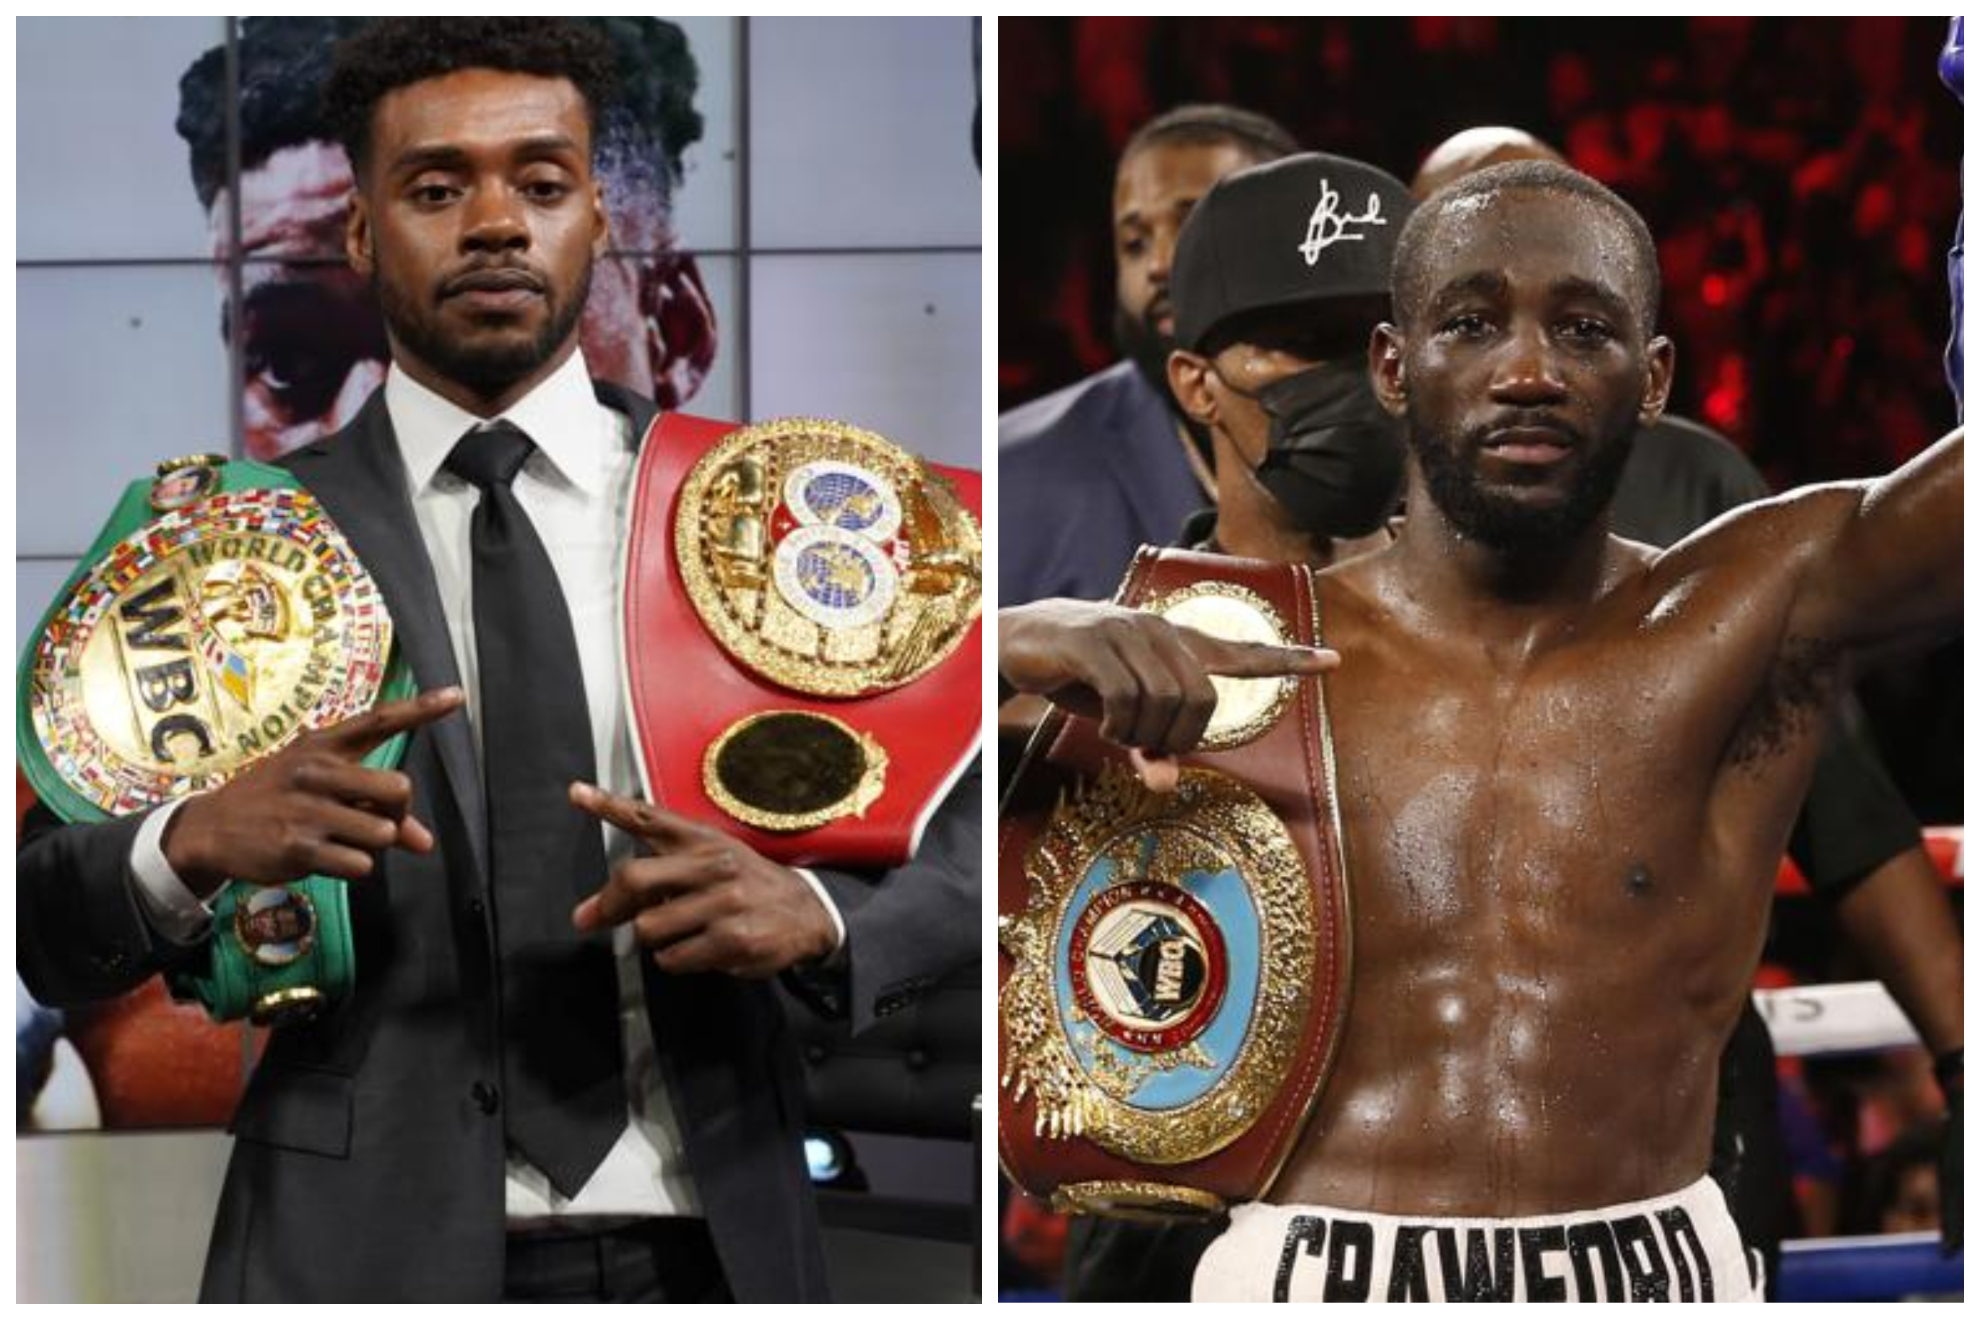 Errol Spence Jr. and Terence Crawford are close to announcing a fight.